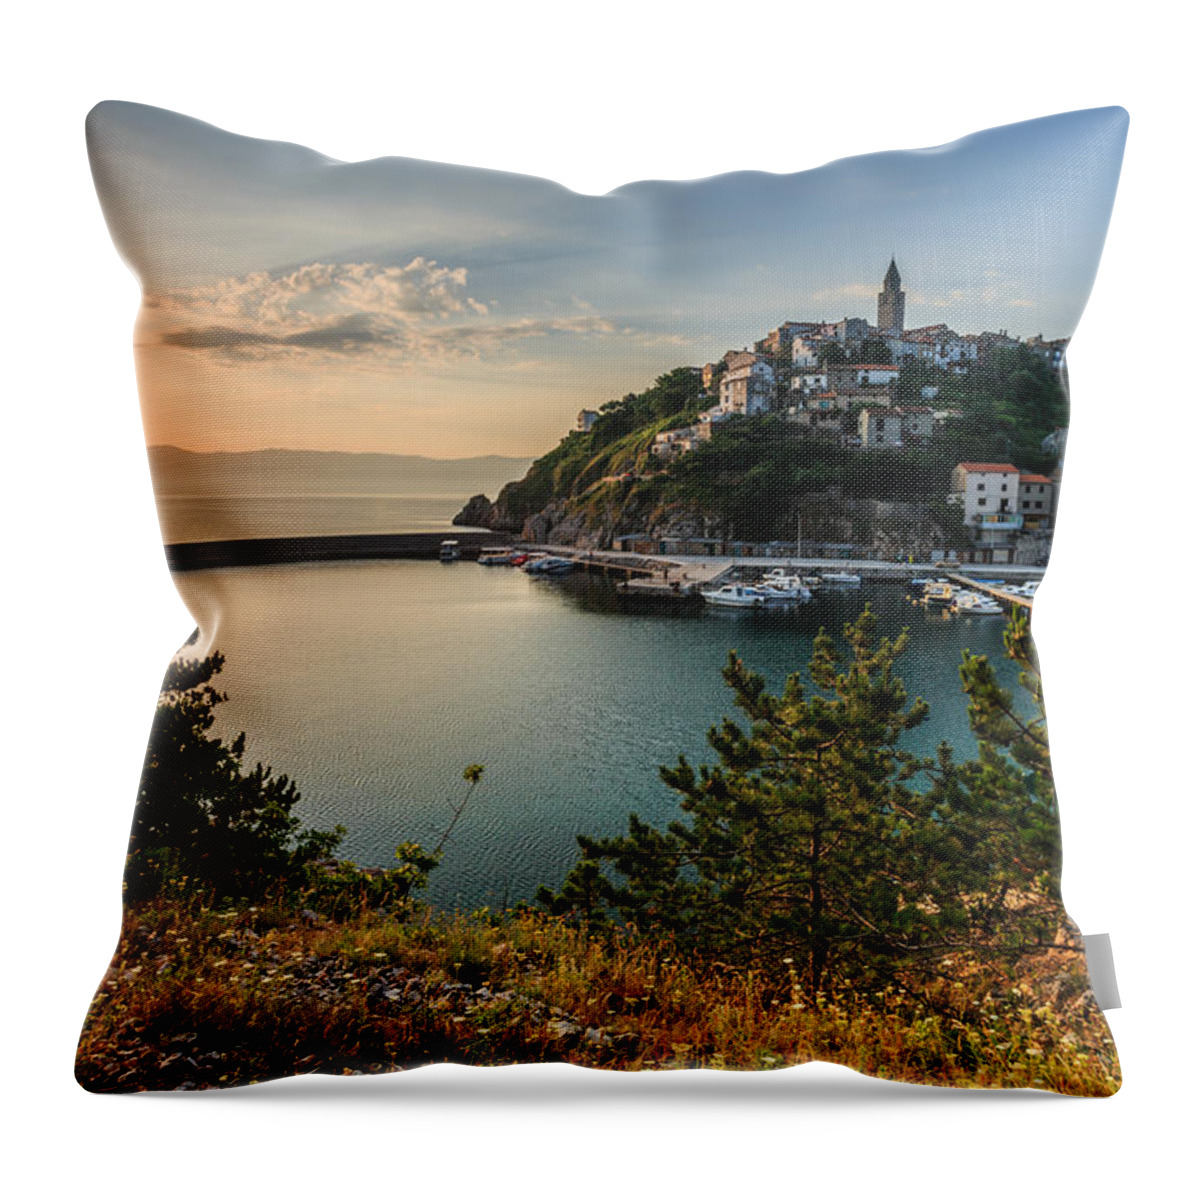 Landscape Throw Pillow featuring the photograph Vrbnik by Davorin Mance